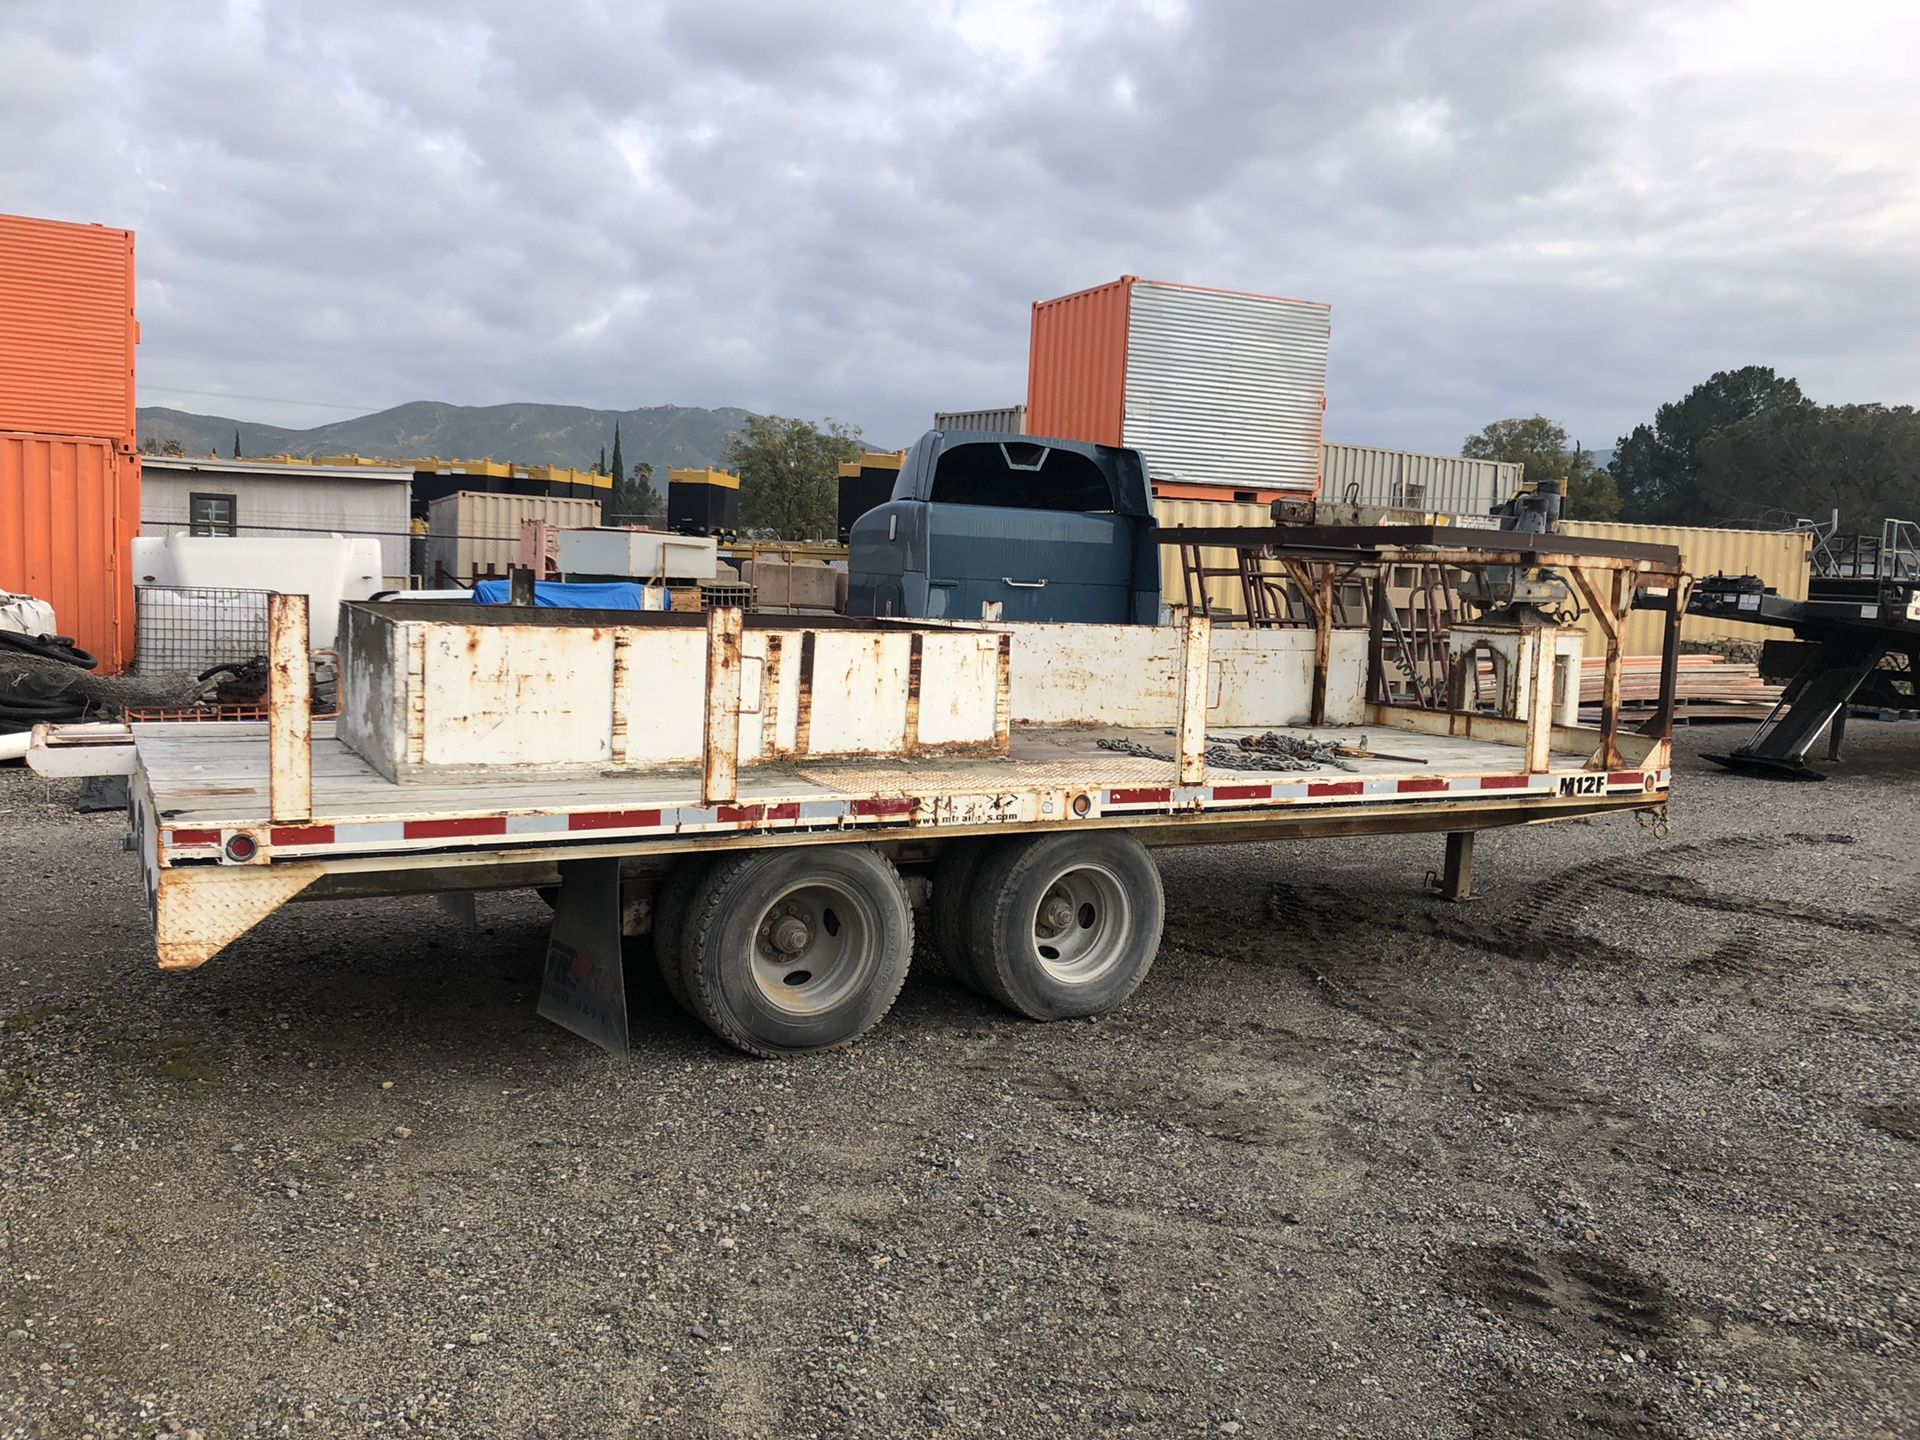 20’ flatbed trailer with crane. Air brakes